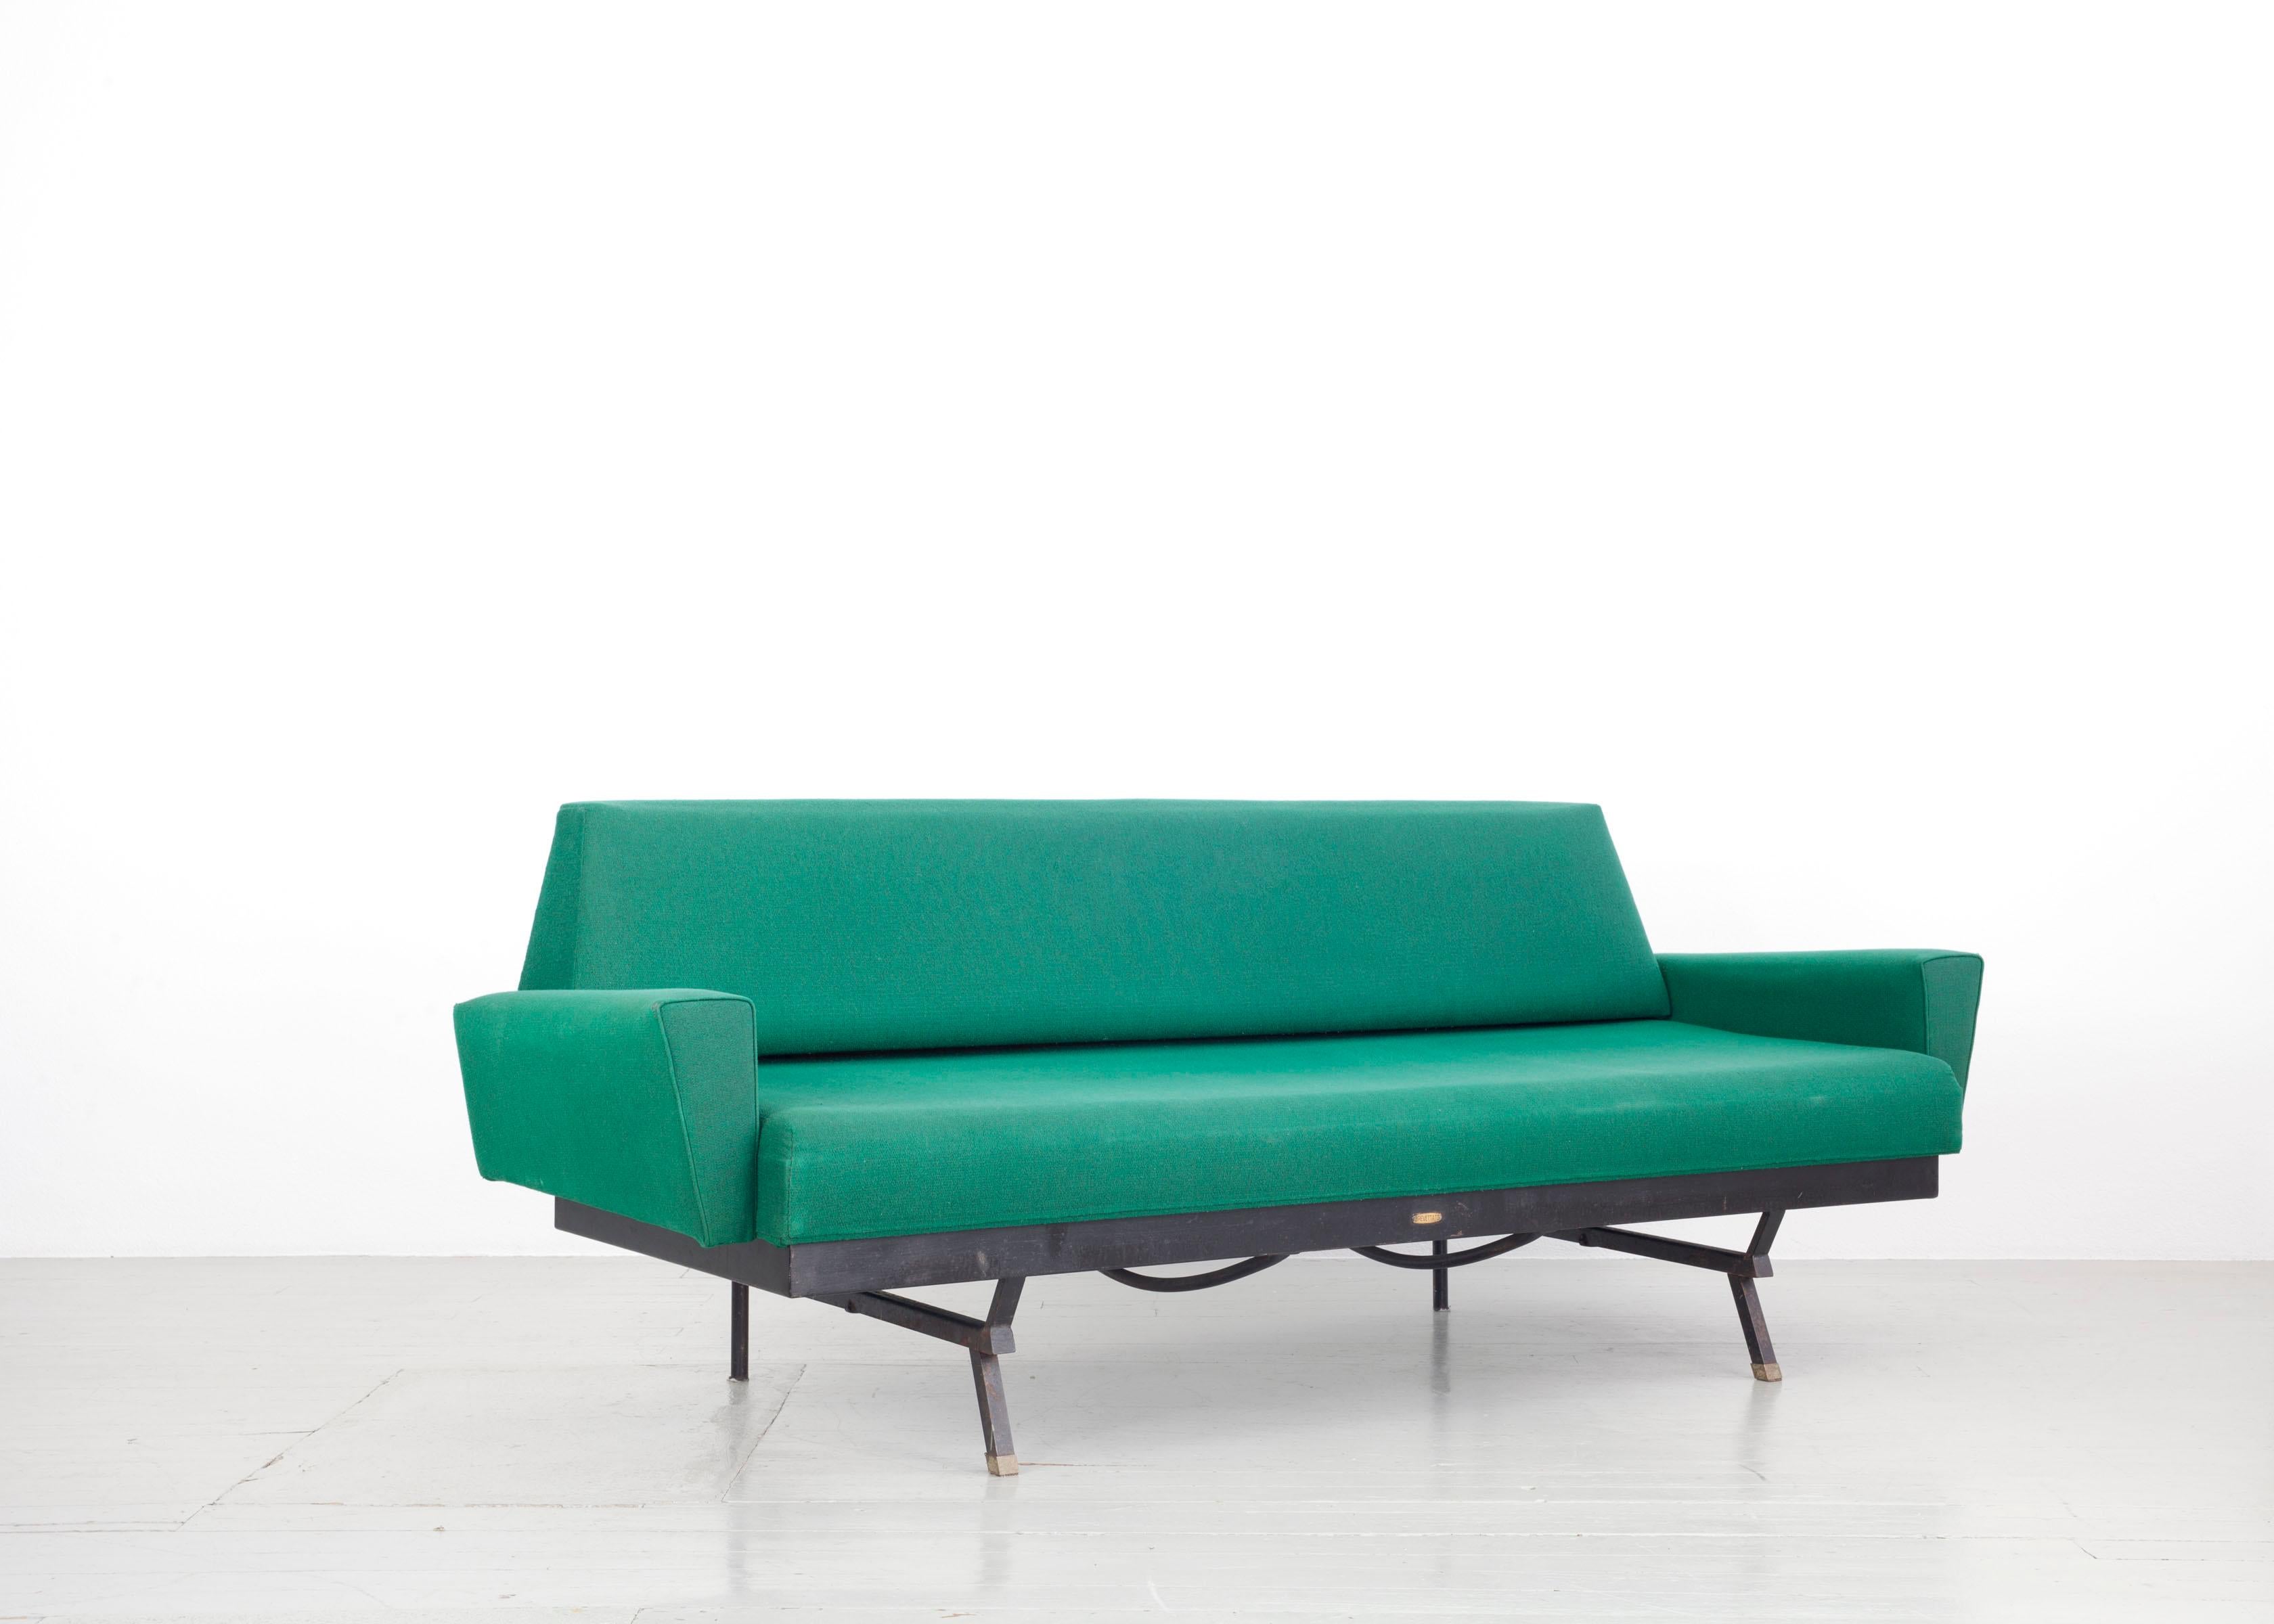 This Italian sofa bed was designed in the 1950s. The shapes lend elegance and modernity to the otherwise quite minimalist design. The seat is foldable, this way the sofa can serve as a bed, however, the mattress is missing. The original green cover